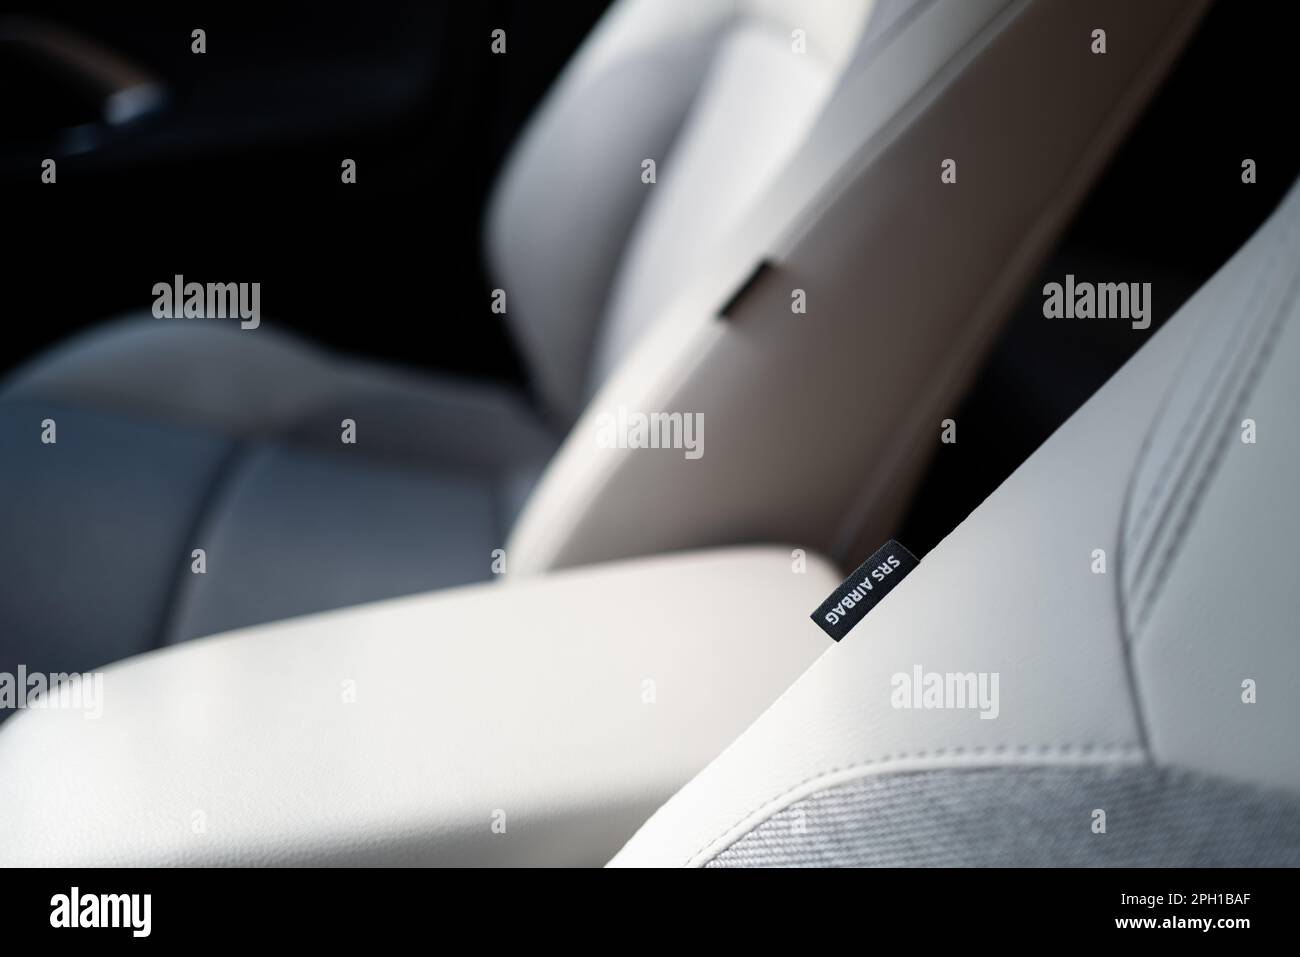 Shallow focus of an SRS Airbag tag seen attached to front part leather seats in a hybrid, new technology vehicle. The central armrest can also be seen Stock Photo